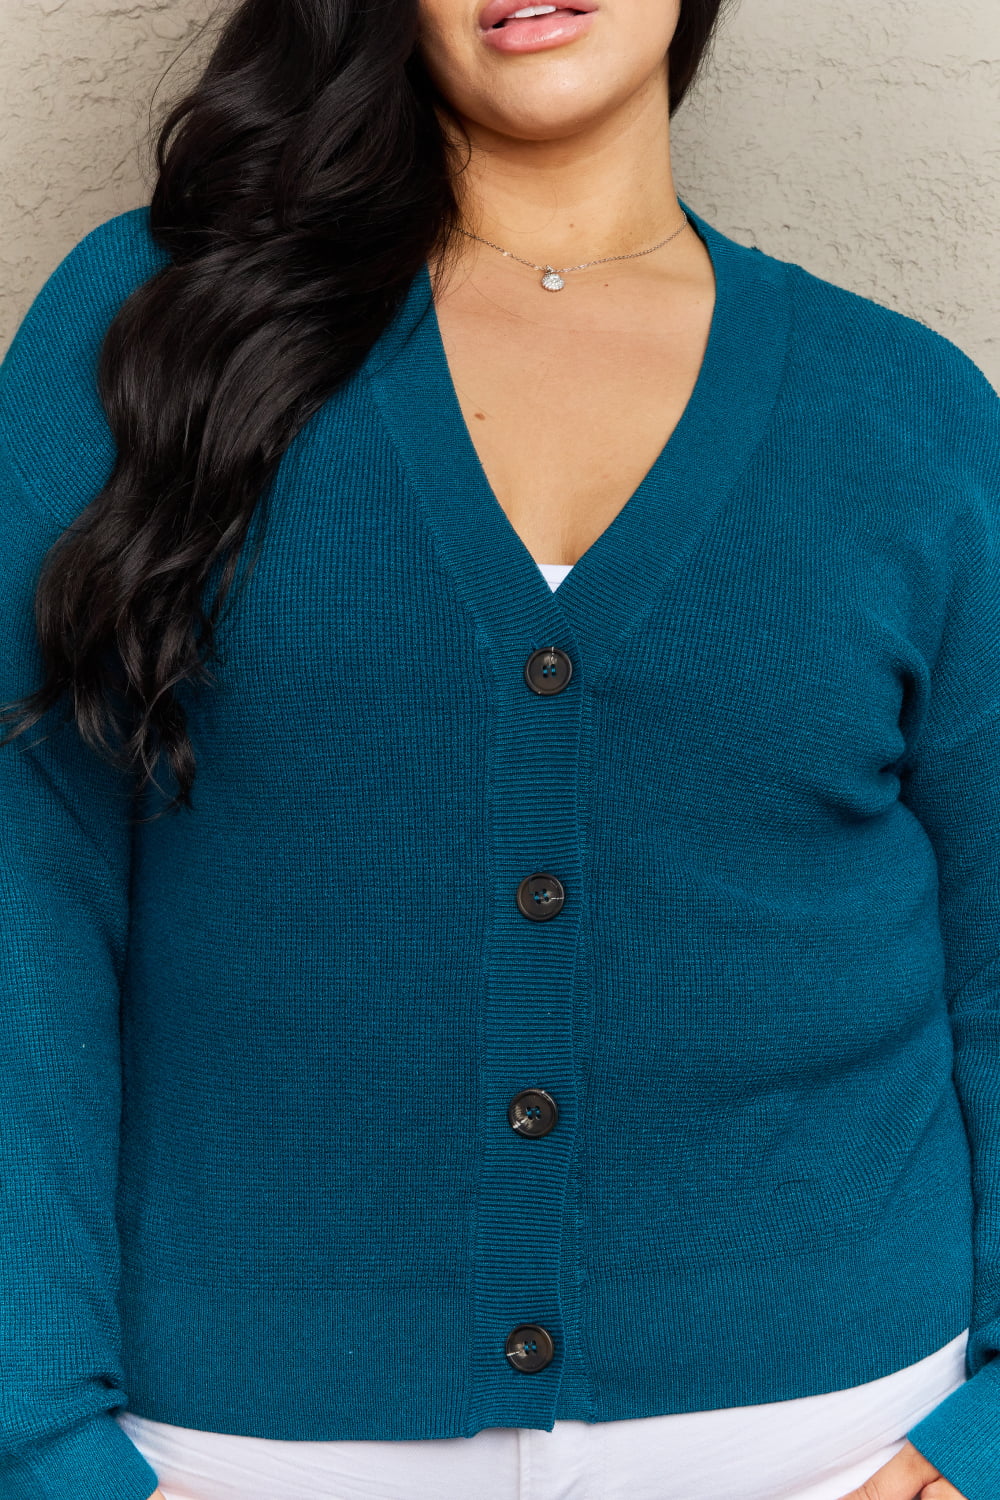 Kiss Me Tonight Full Size Button Down Cardigan in Teal - Women’s Clothing & Accessories - Shirts & Tops - 11 - 2024